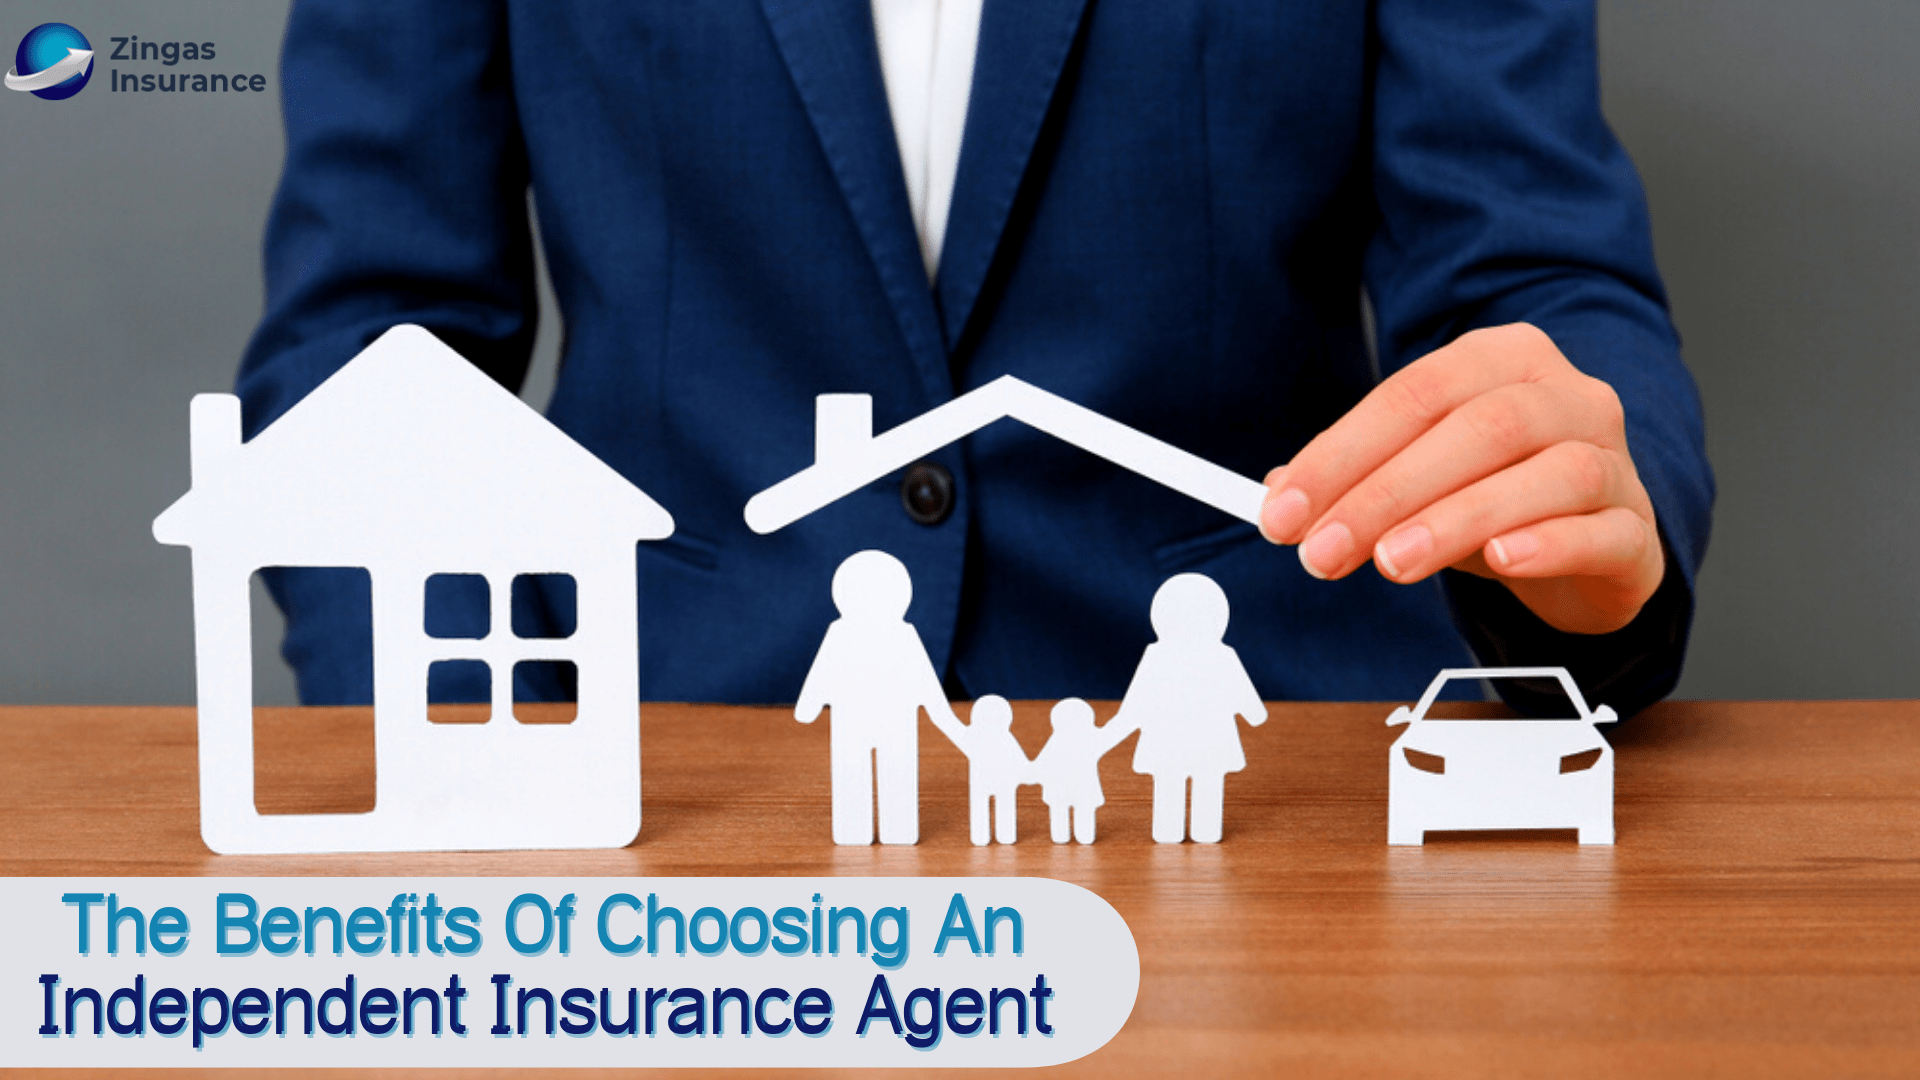 The Benefits Of Choosing An Independent Insurance Agent